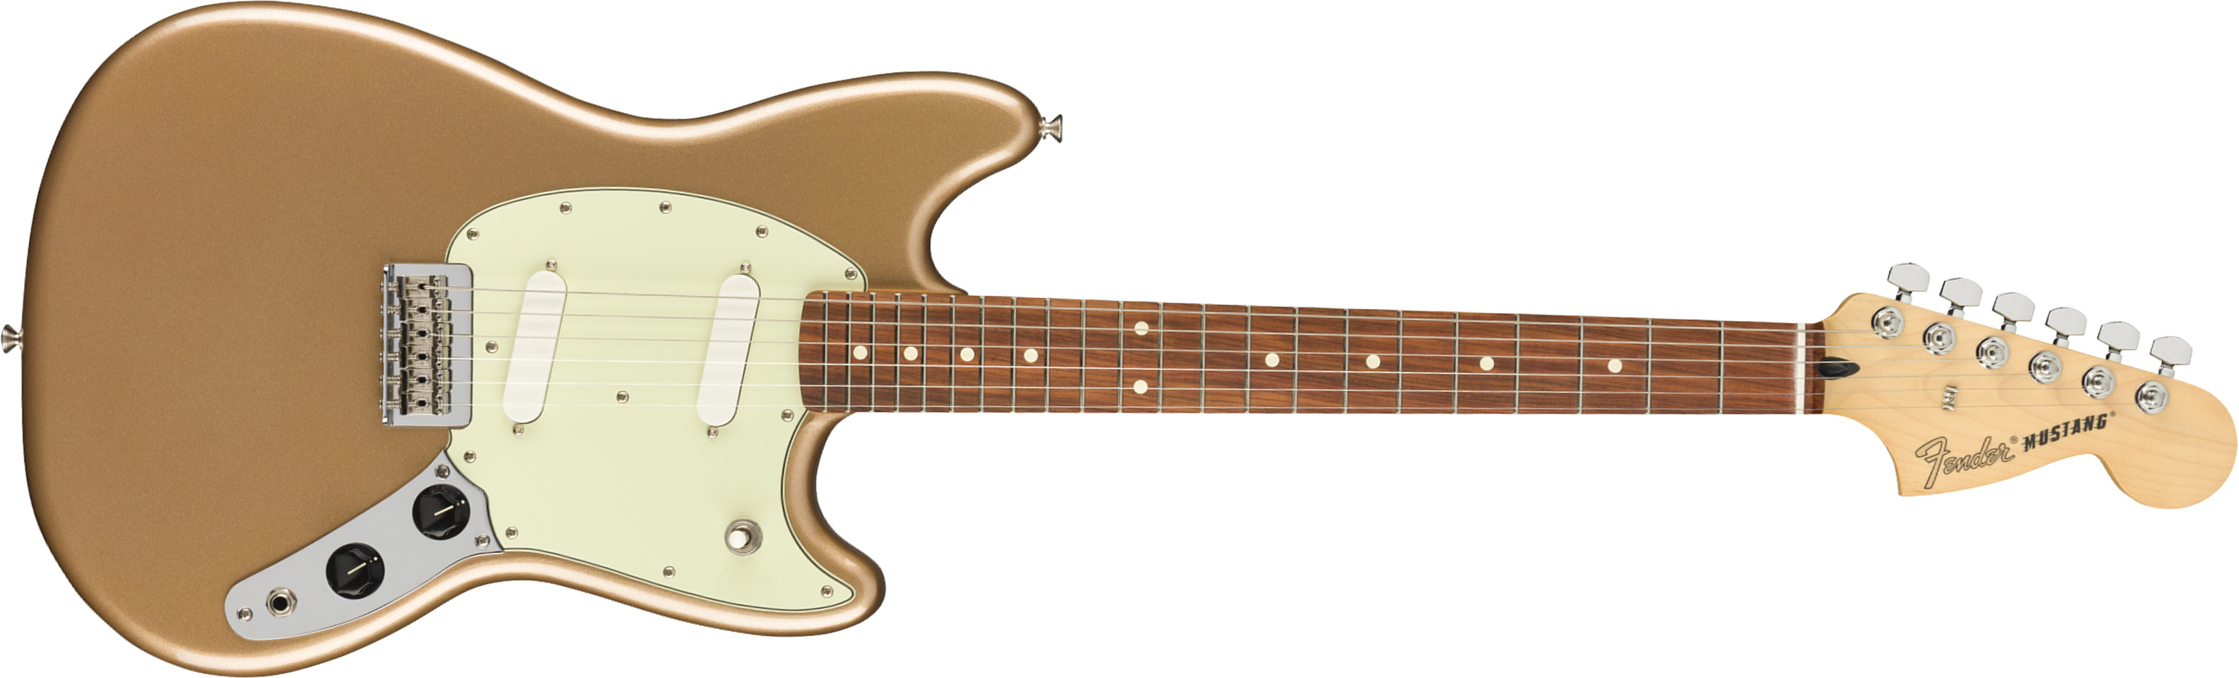 Fender Mustang Player Mex Ht Ss Pf - Firemist Gold - Retro rock electric guitar - Main picture